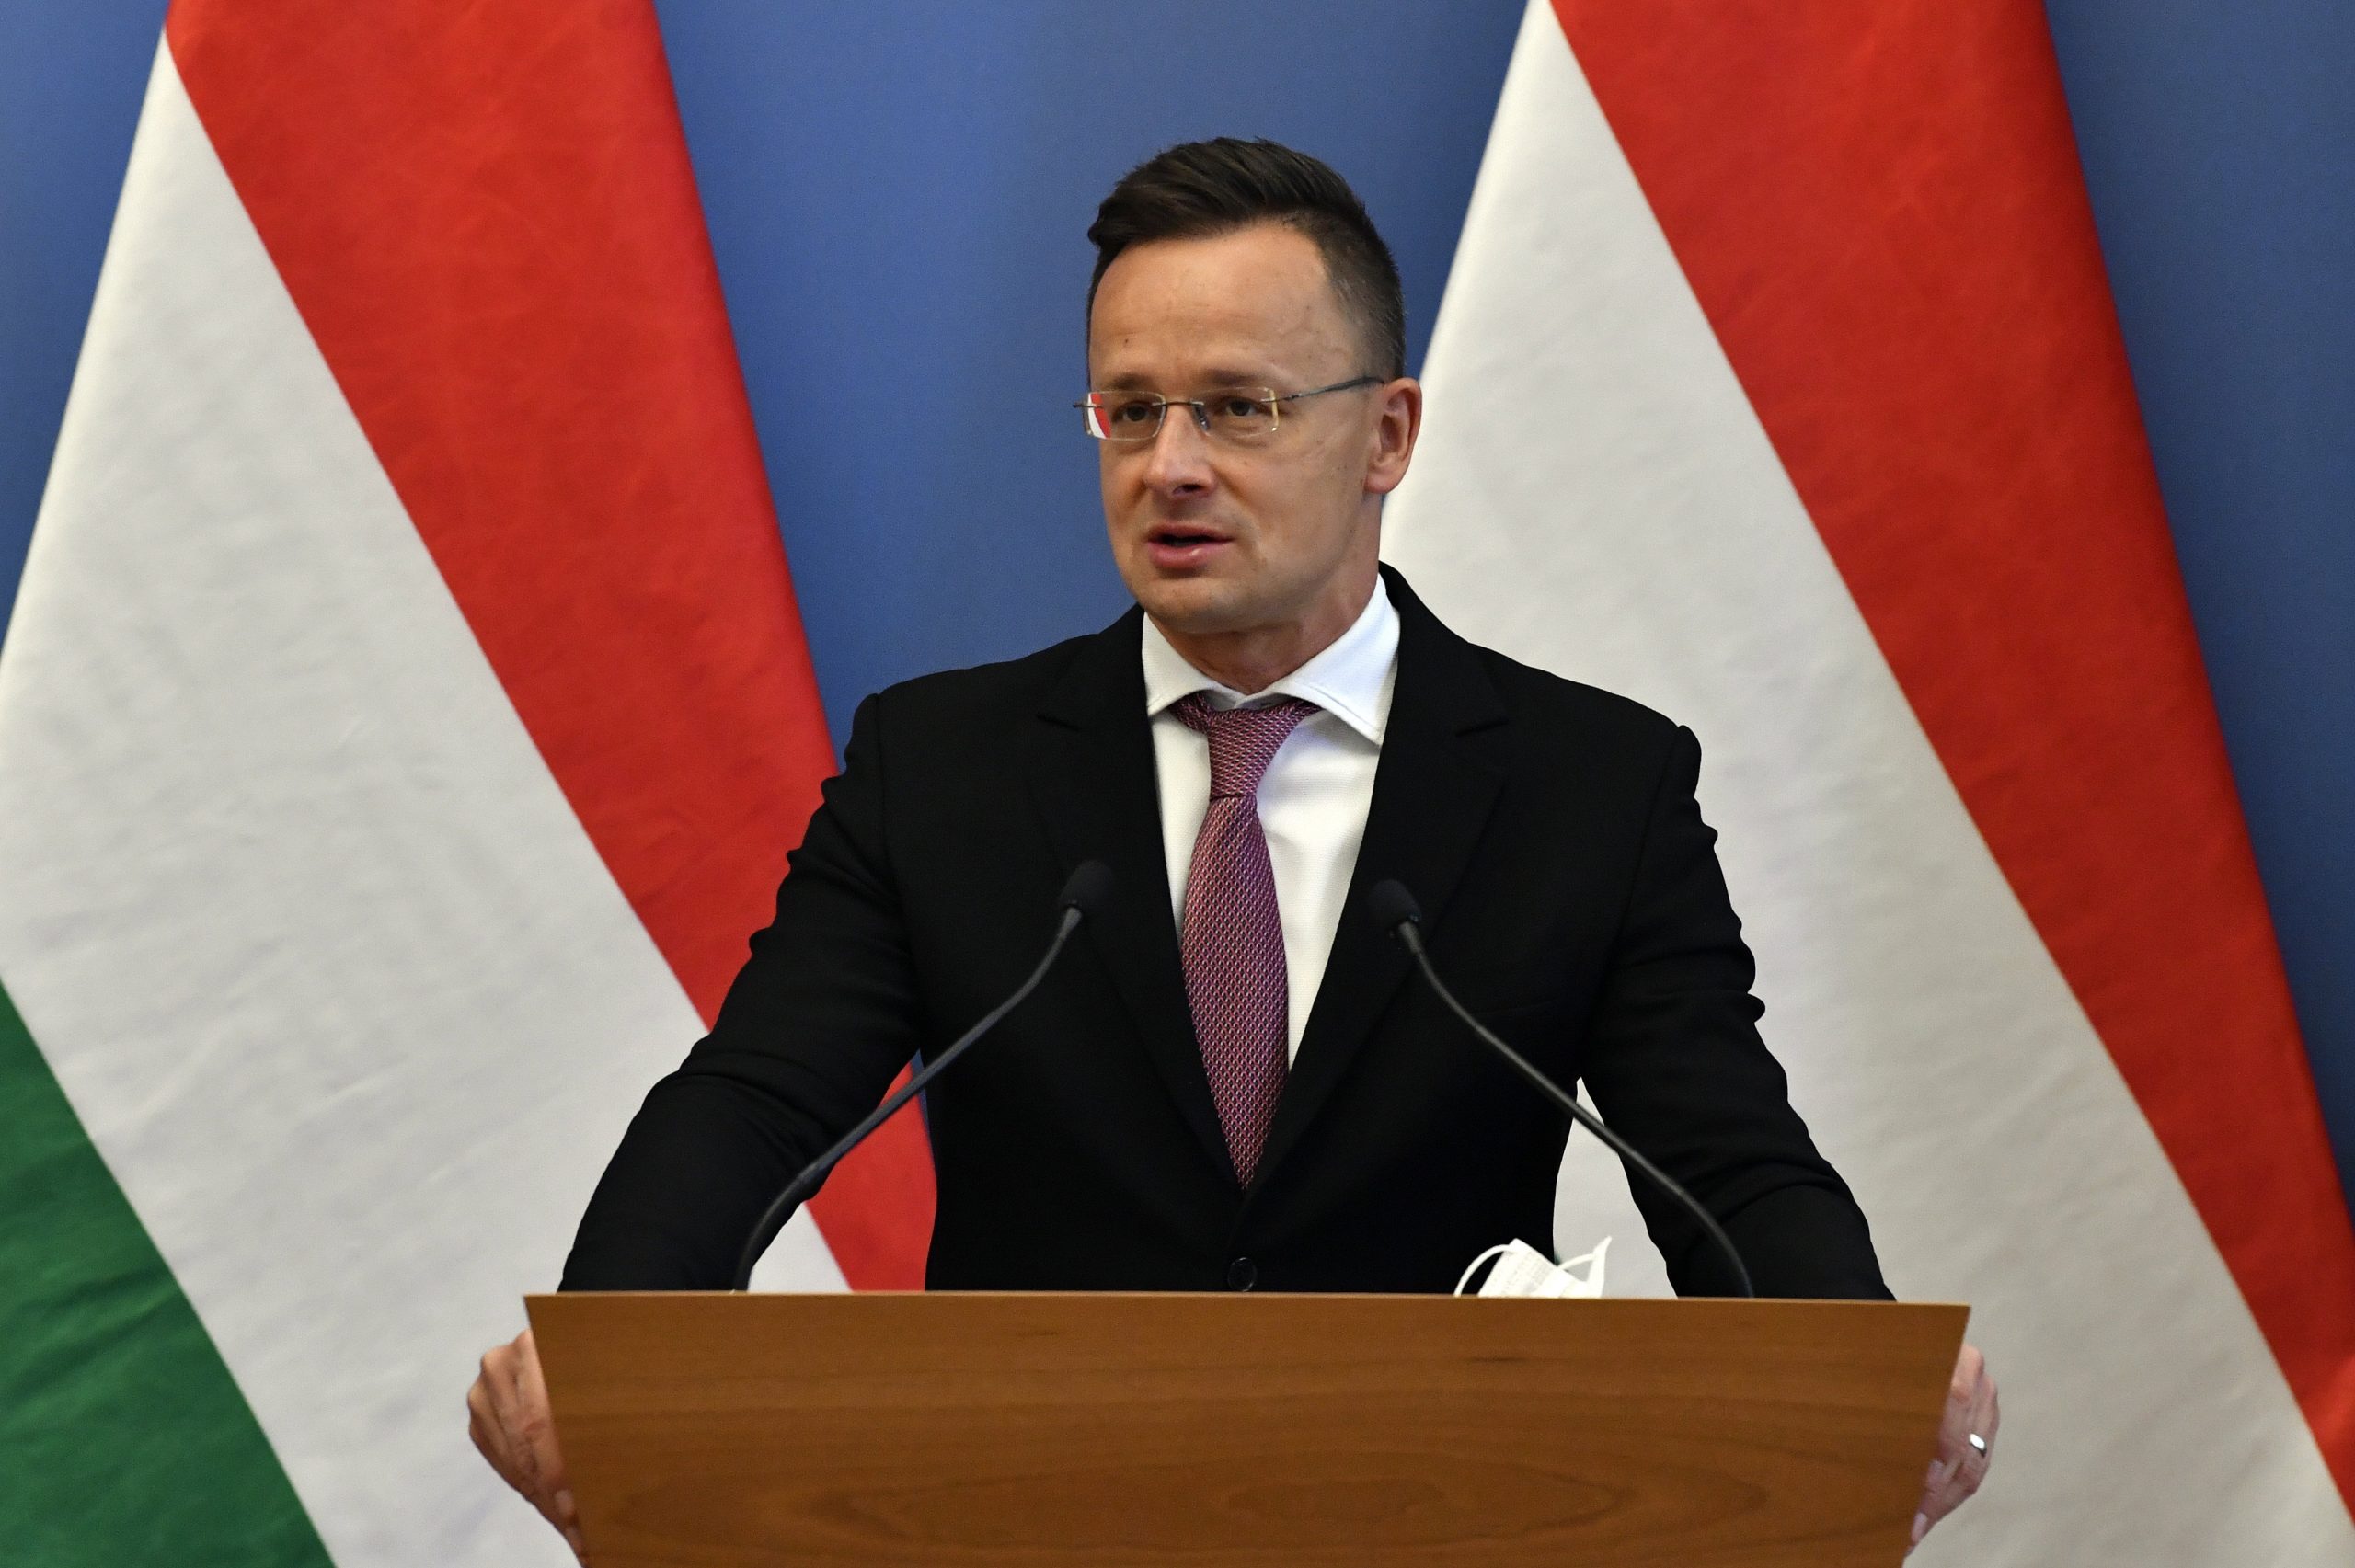 FM Szijjártó: Education in Mother Tongue Must Be Guaranteed to all Hungarians in Carpathian Basin